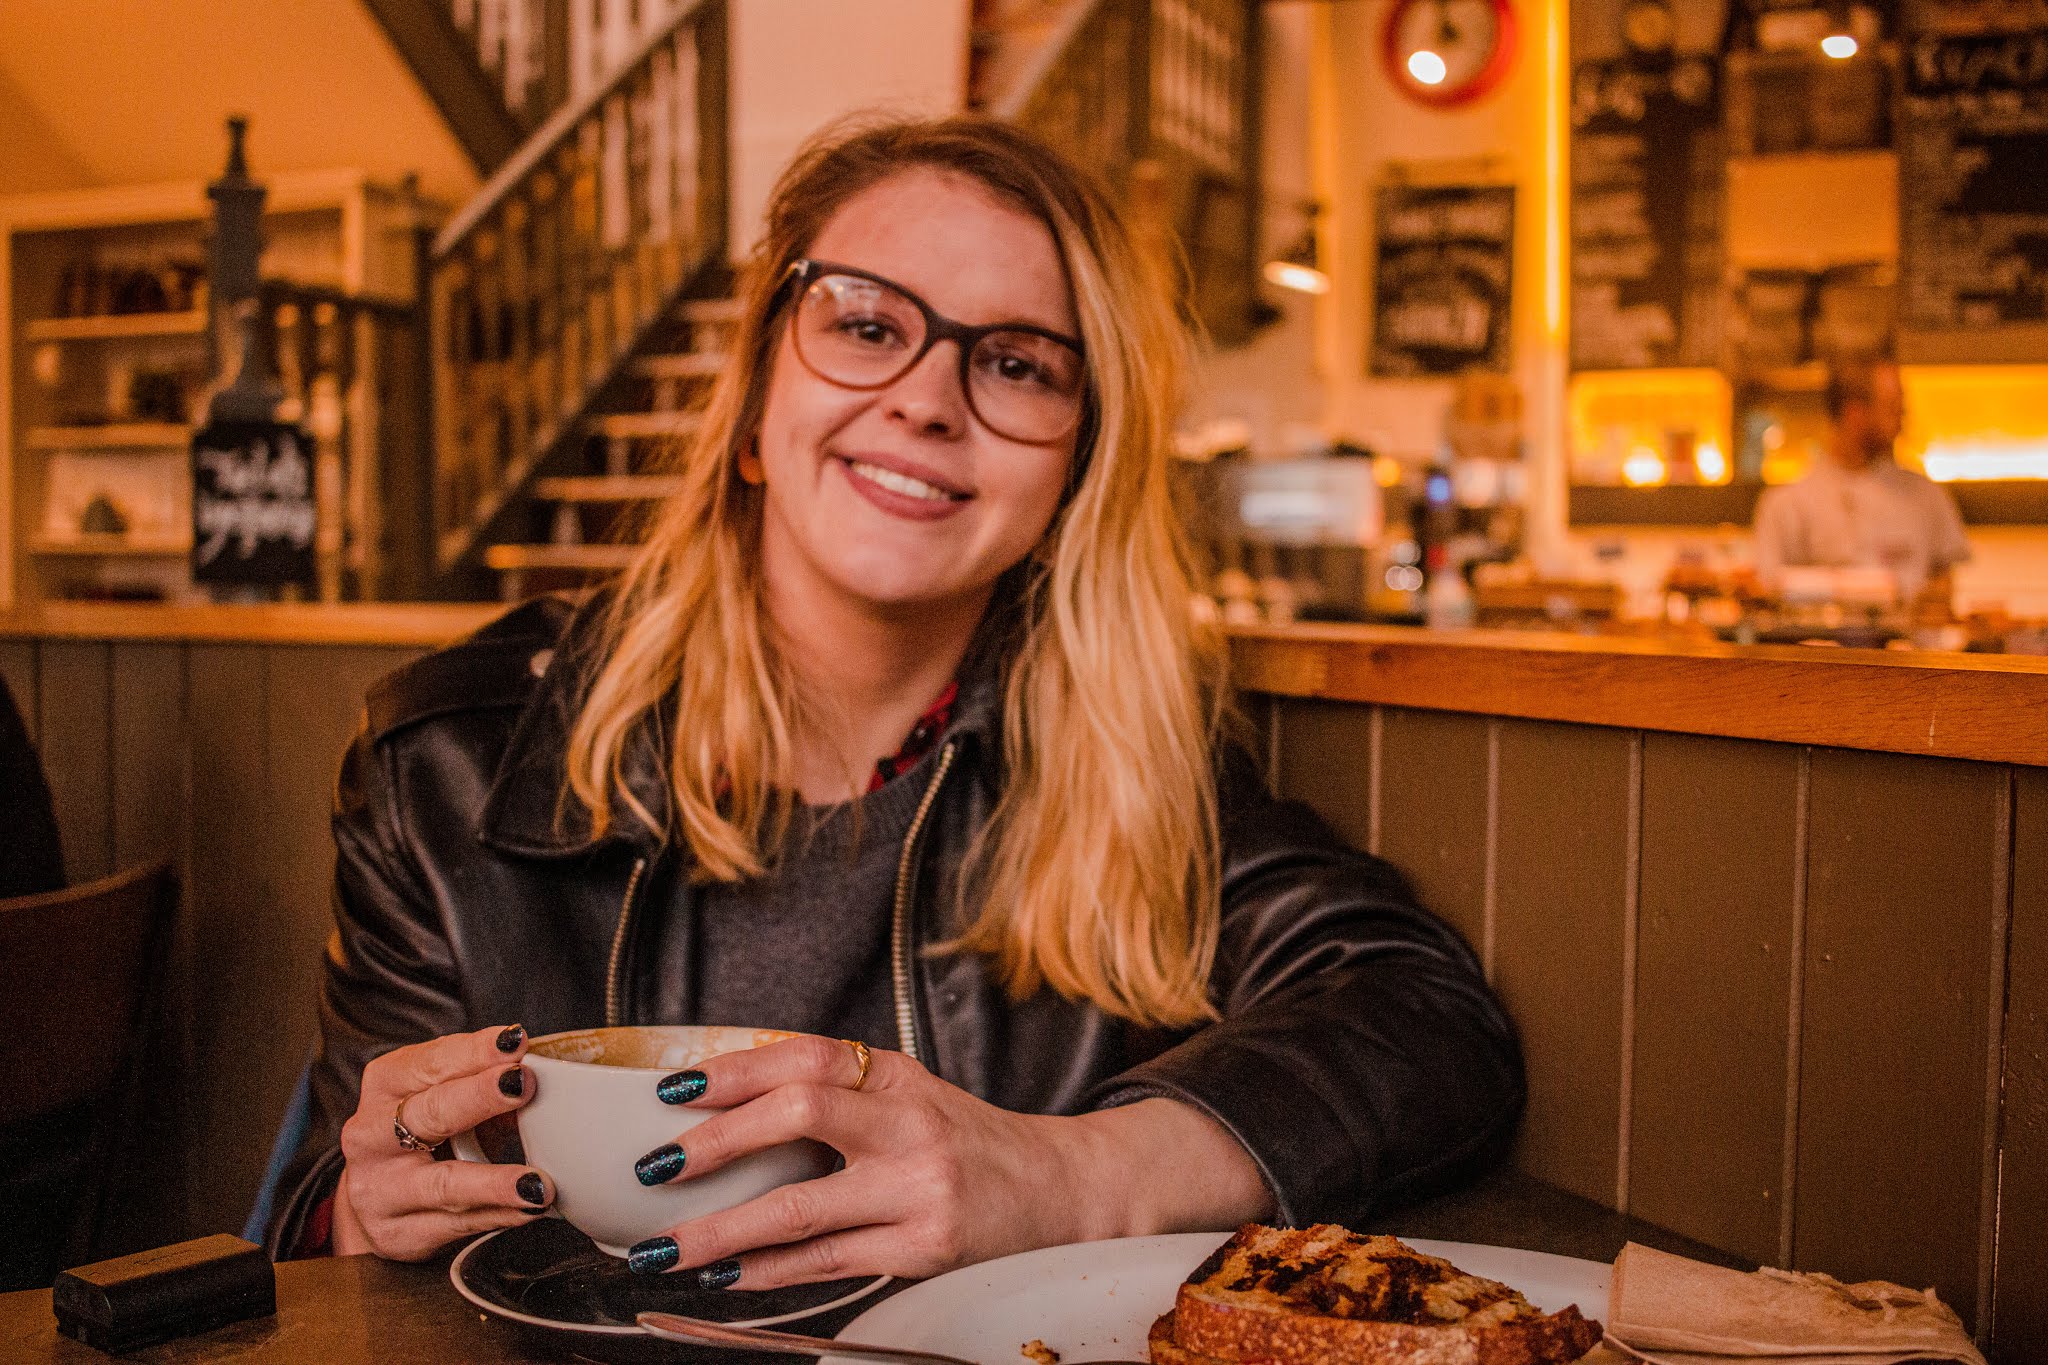 blonde girl chloeharriets in leather jacket and thick rimmed glasses, in coffee shop smiling for lifestyle blog picture, new year new start, blog rebrand